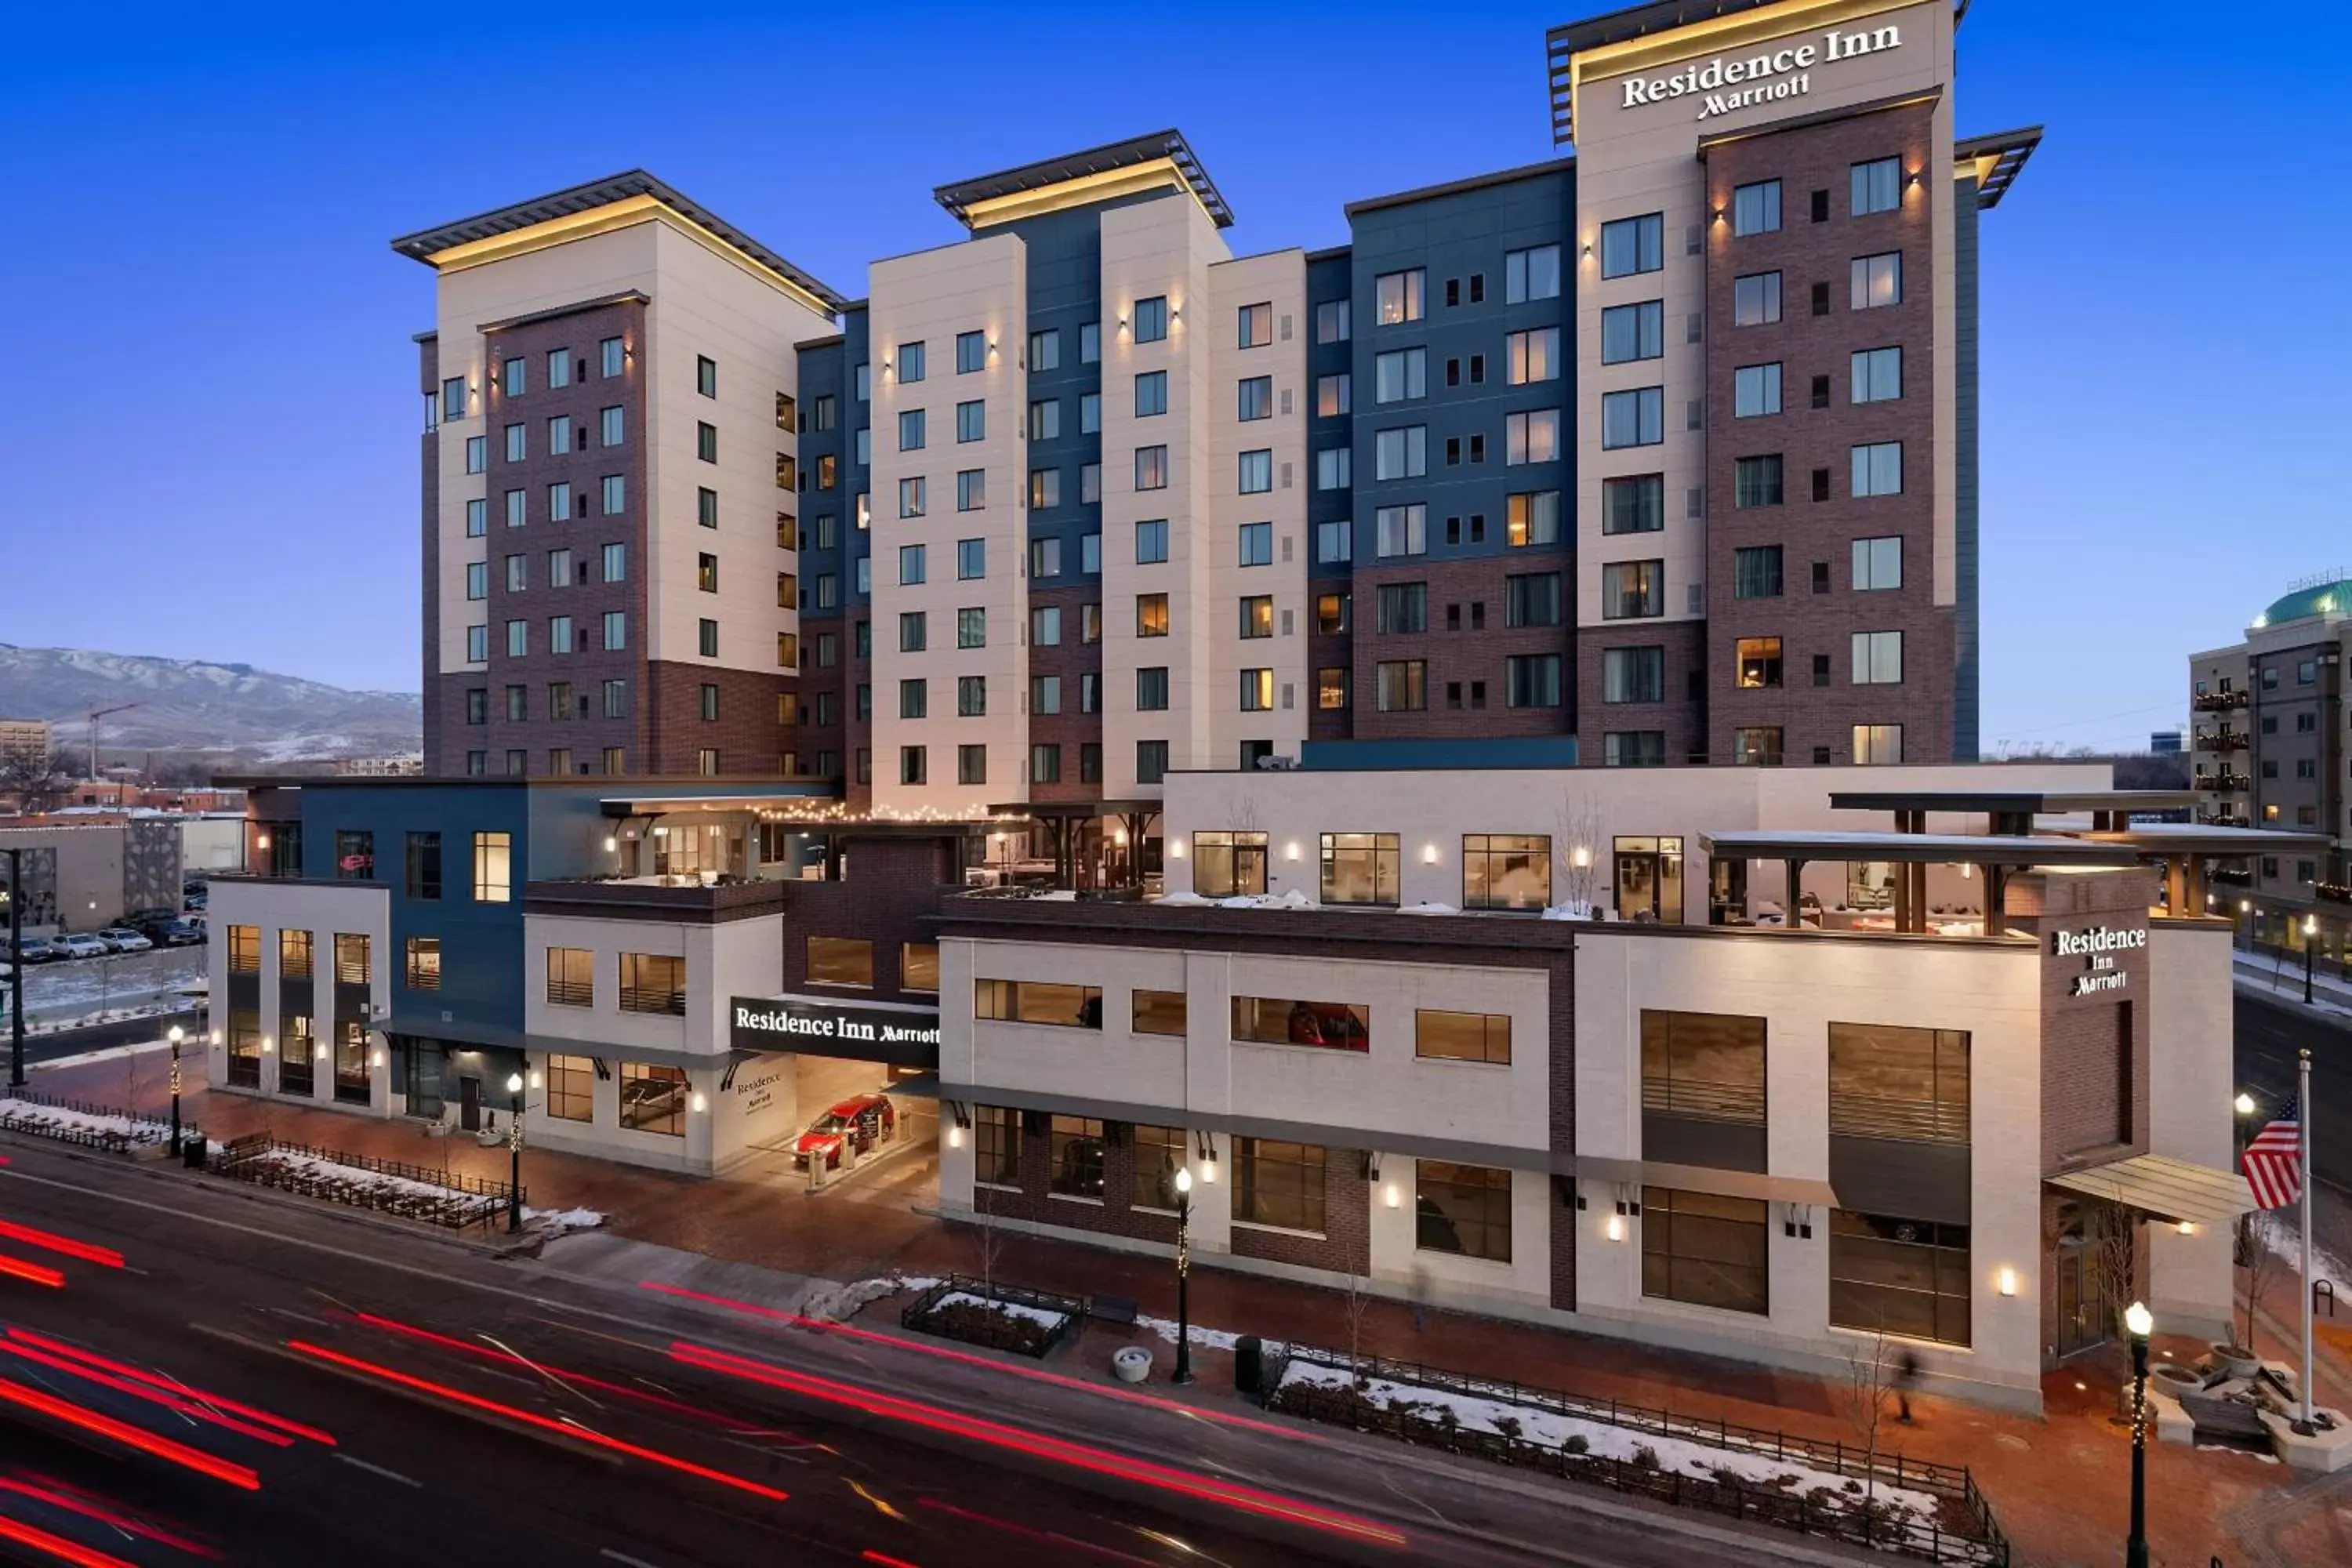 Property building in Residence Inn by Marriott Boise Downtown City Center